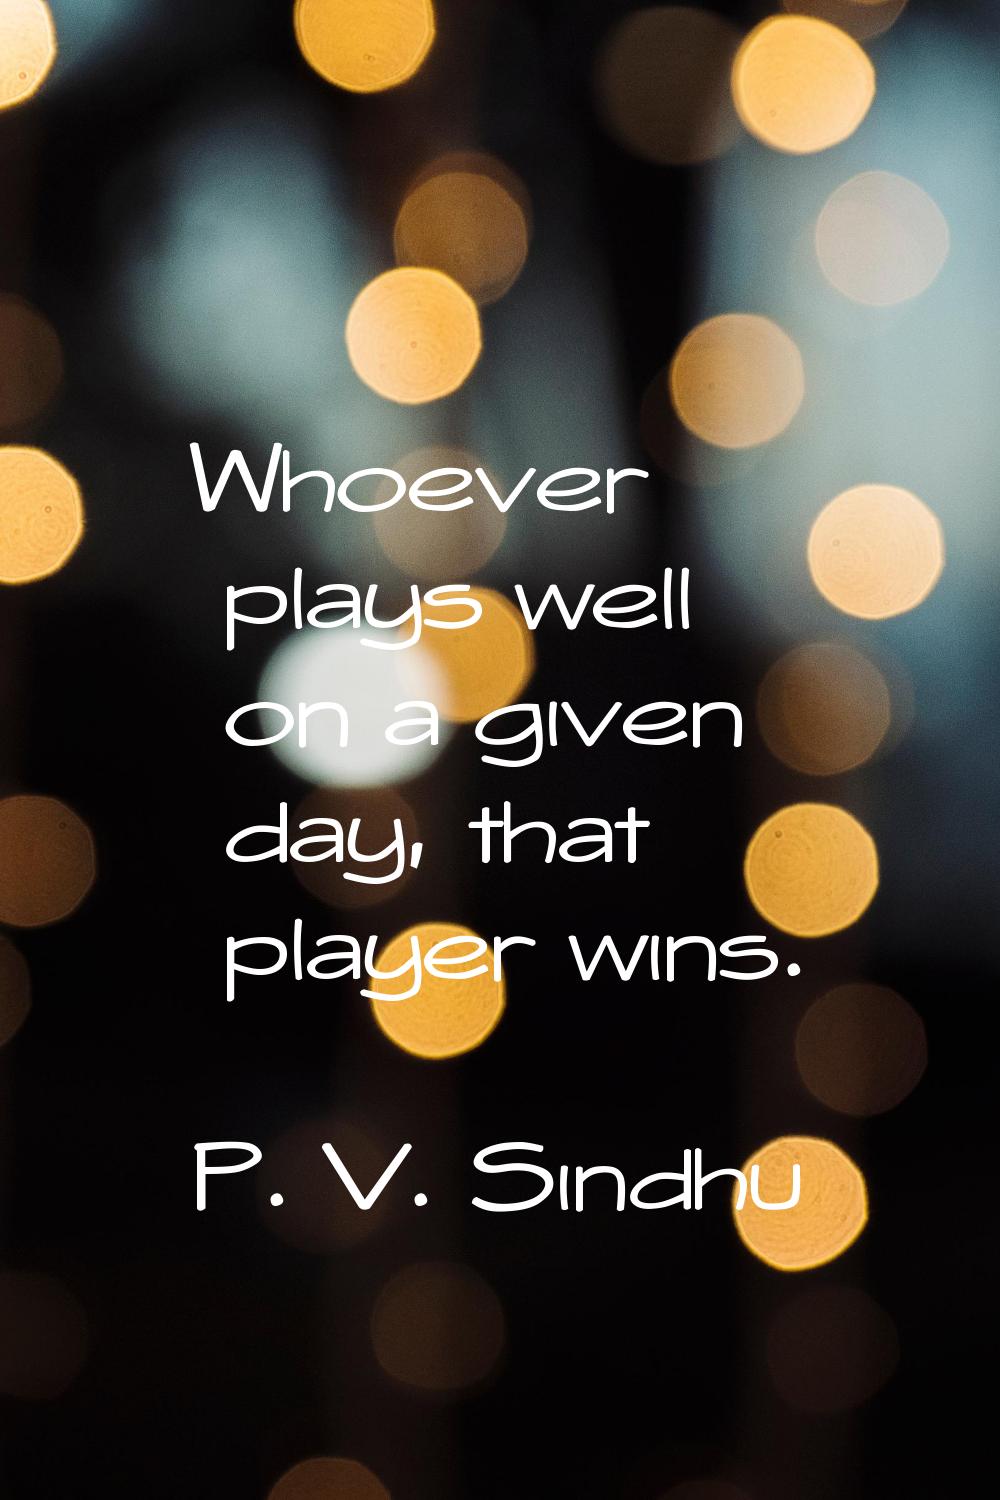 Whoever plays well on a given day, that player wins.